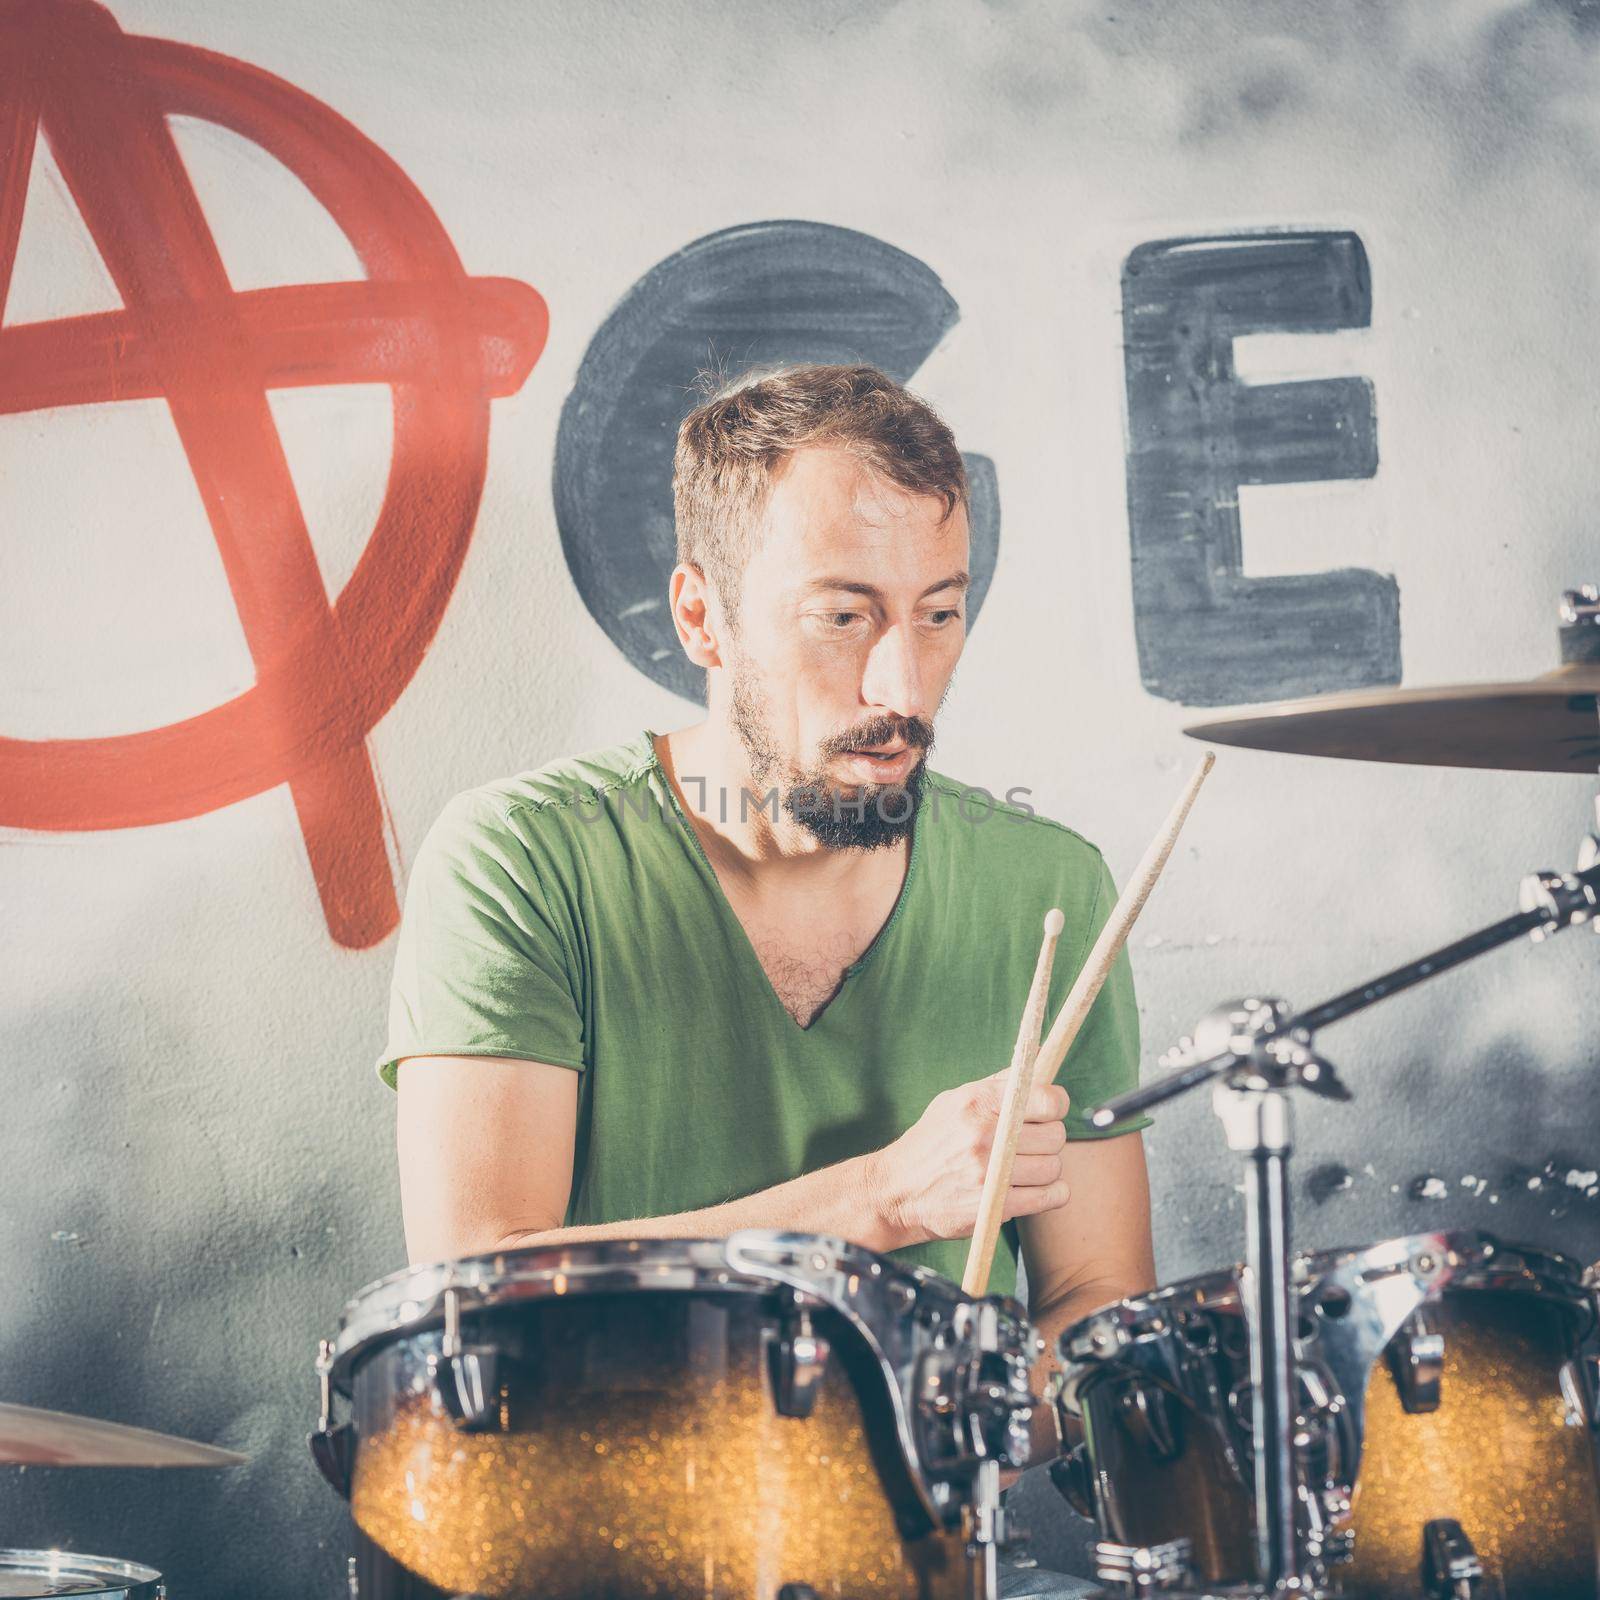 Musician playing the drums on stage in rehearsal room